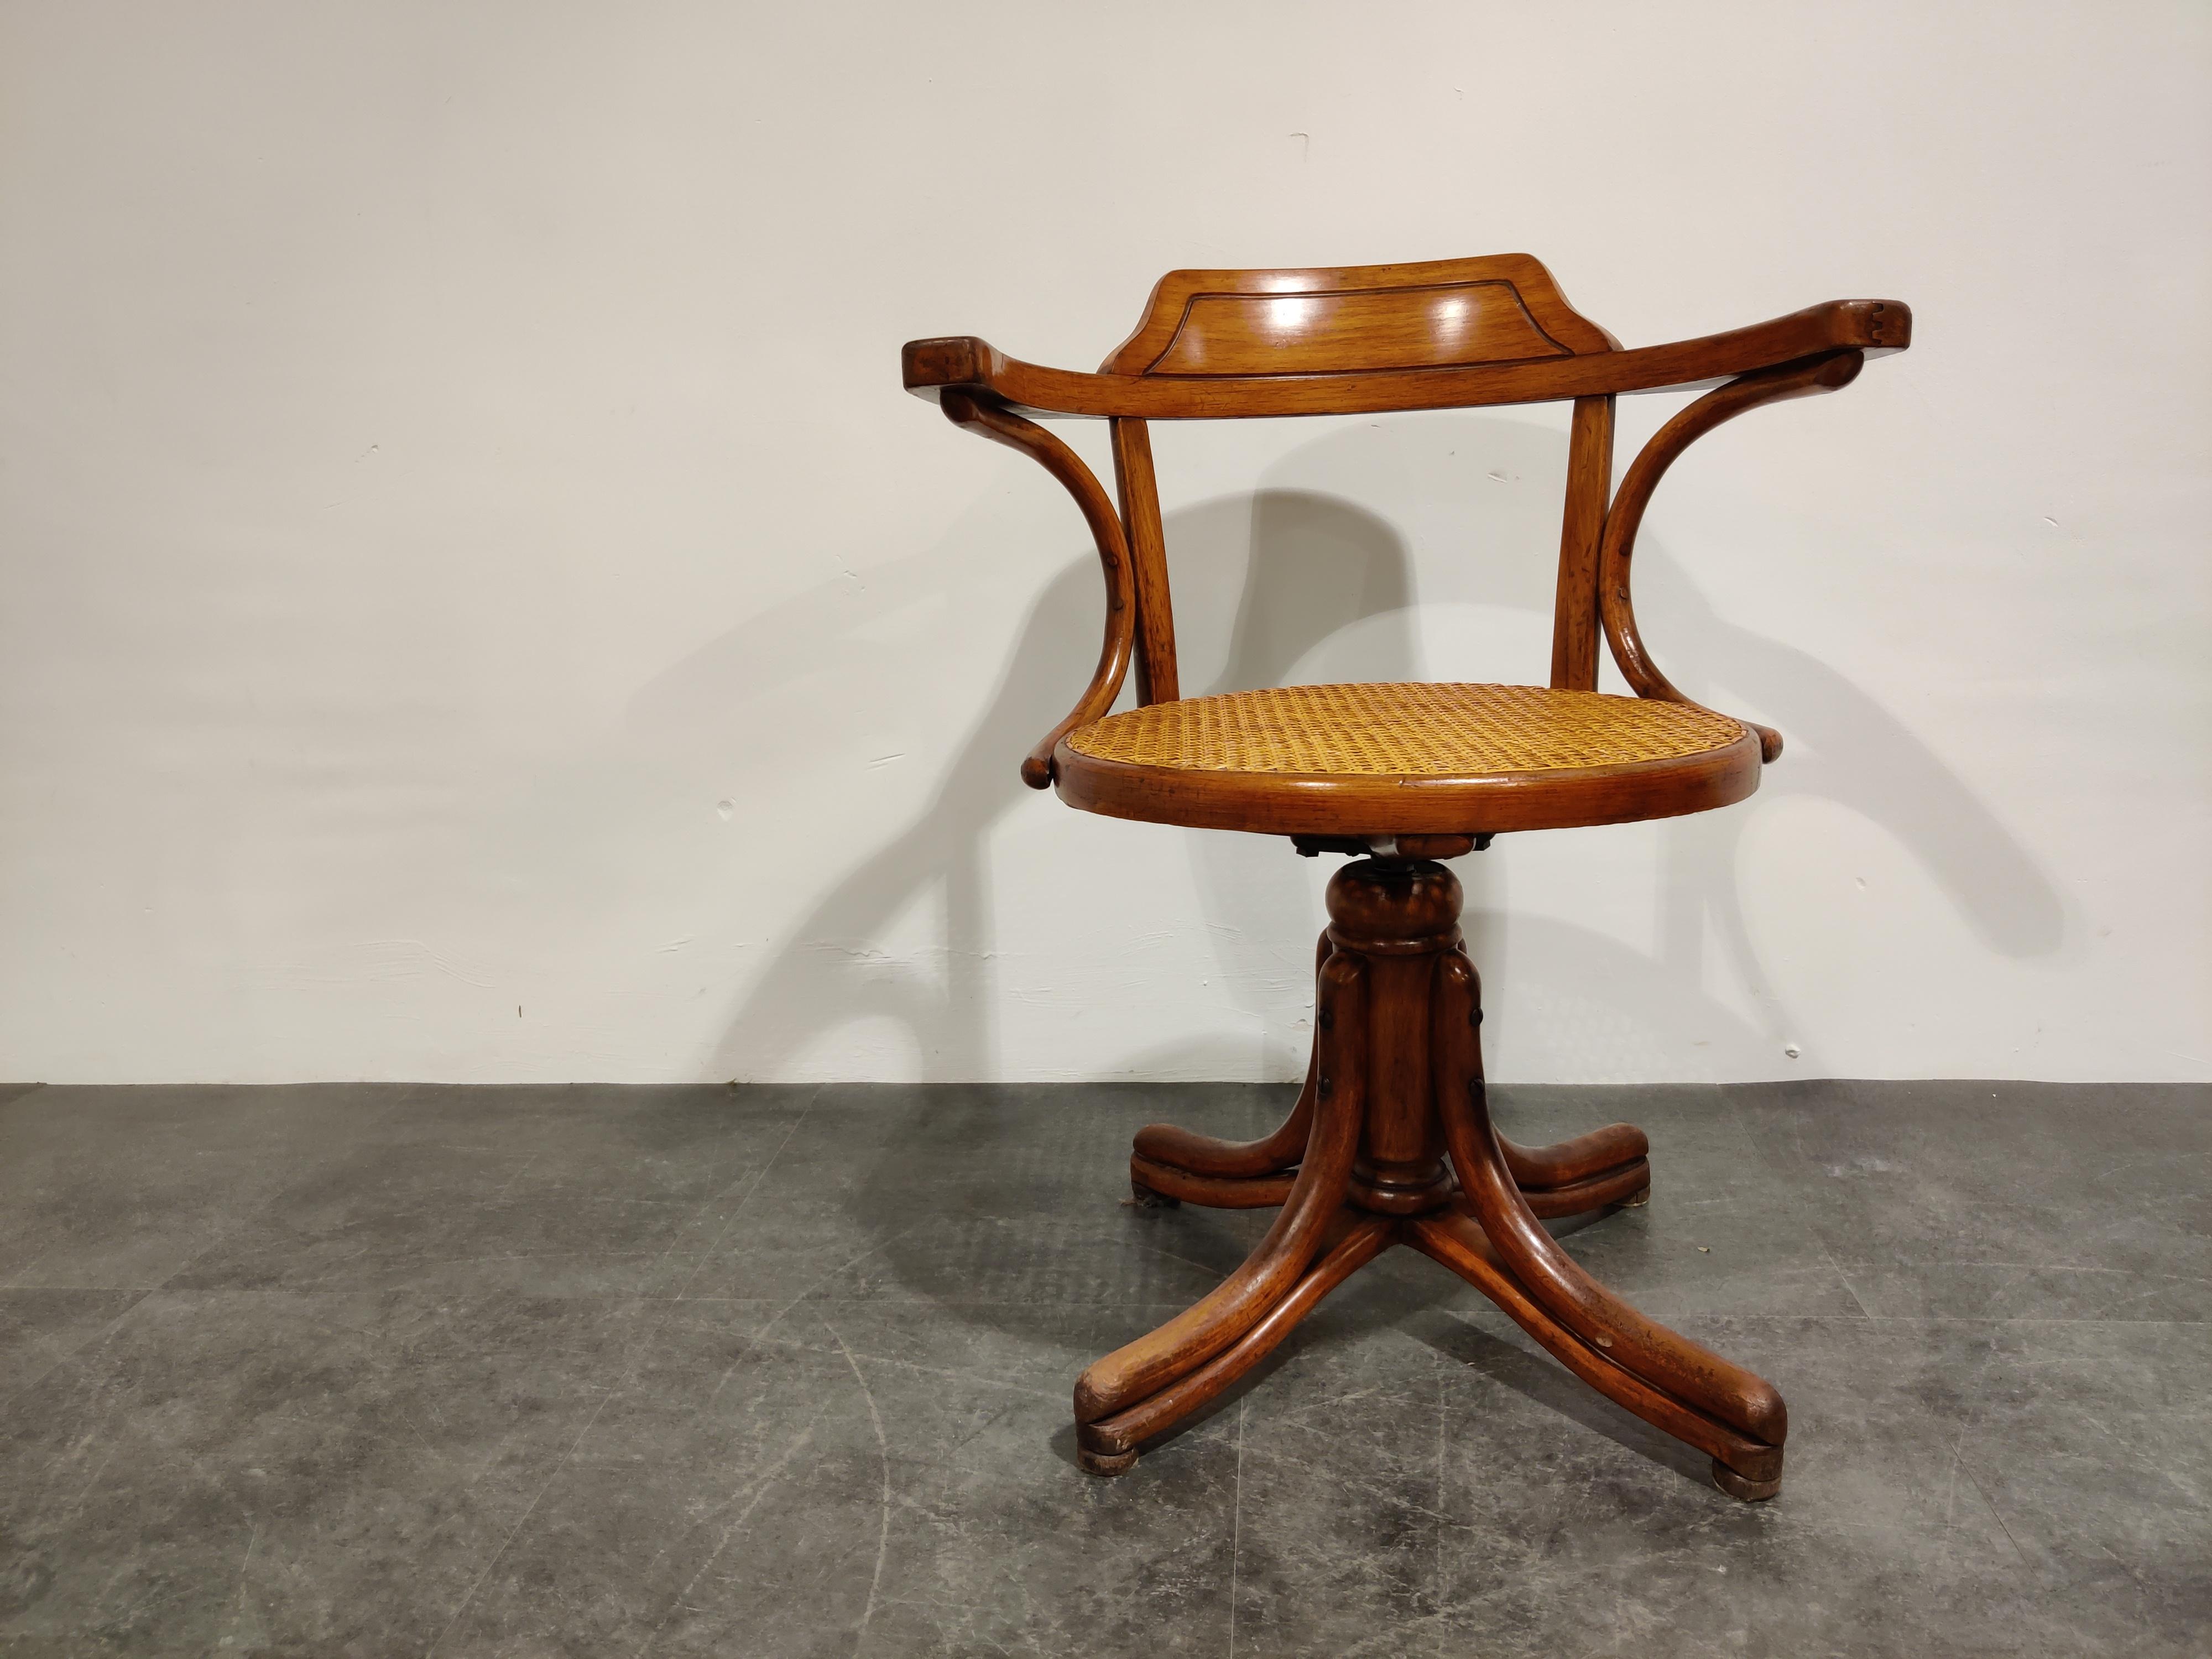 Vintage bentwood desk chair by Thonet with a rattan seat.

Beautiful piece with just the right wear.

This swivel chair is adjustable in height by turning it.

The seat has been refurbished in the past, so it's not the original rattan